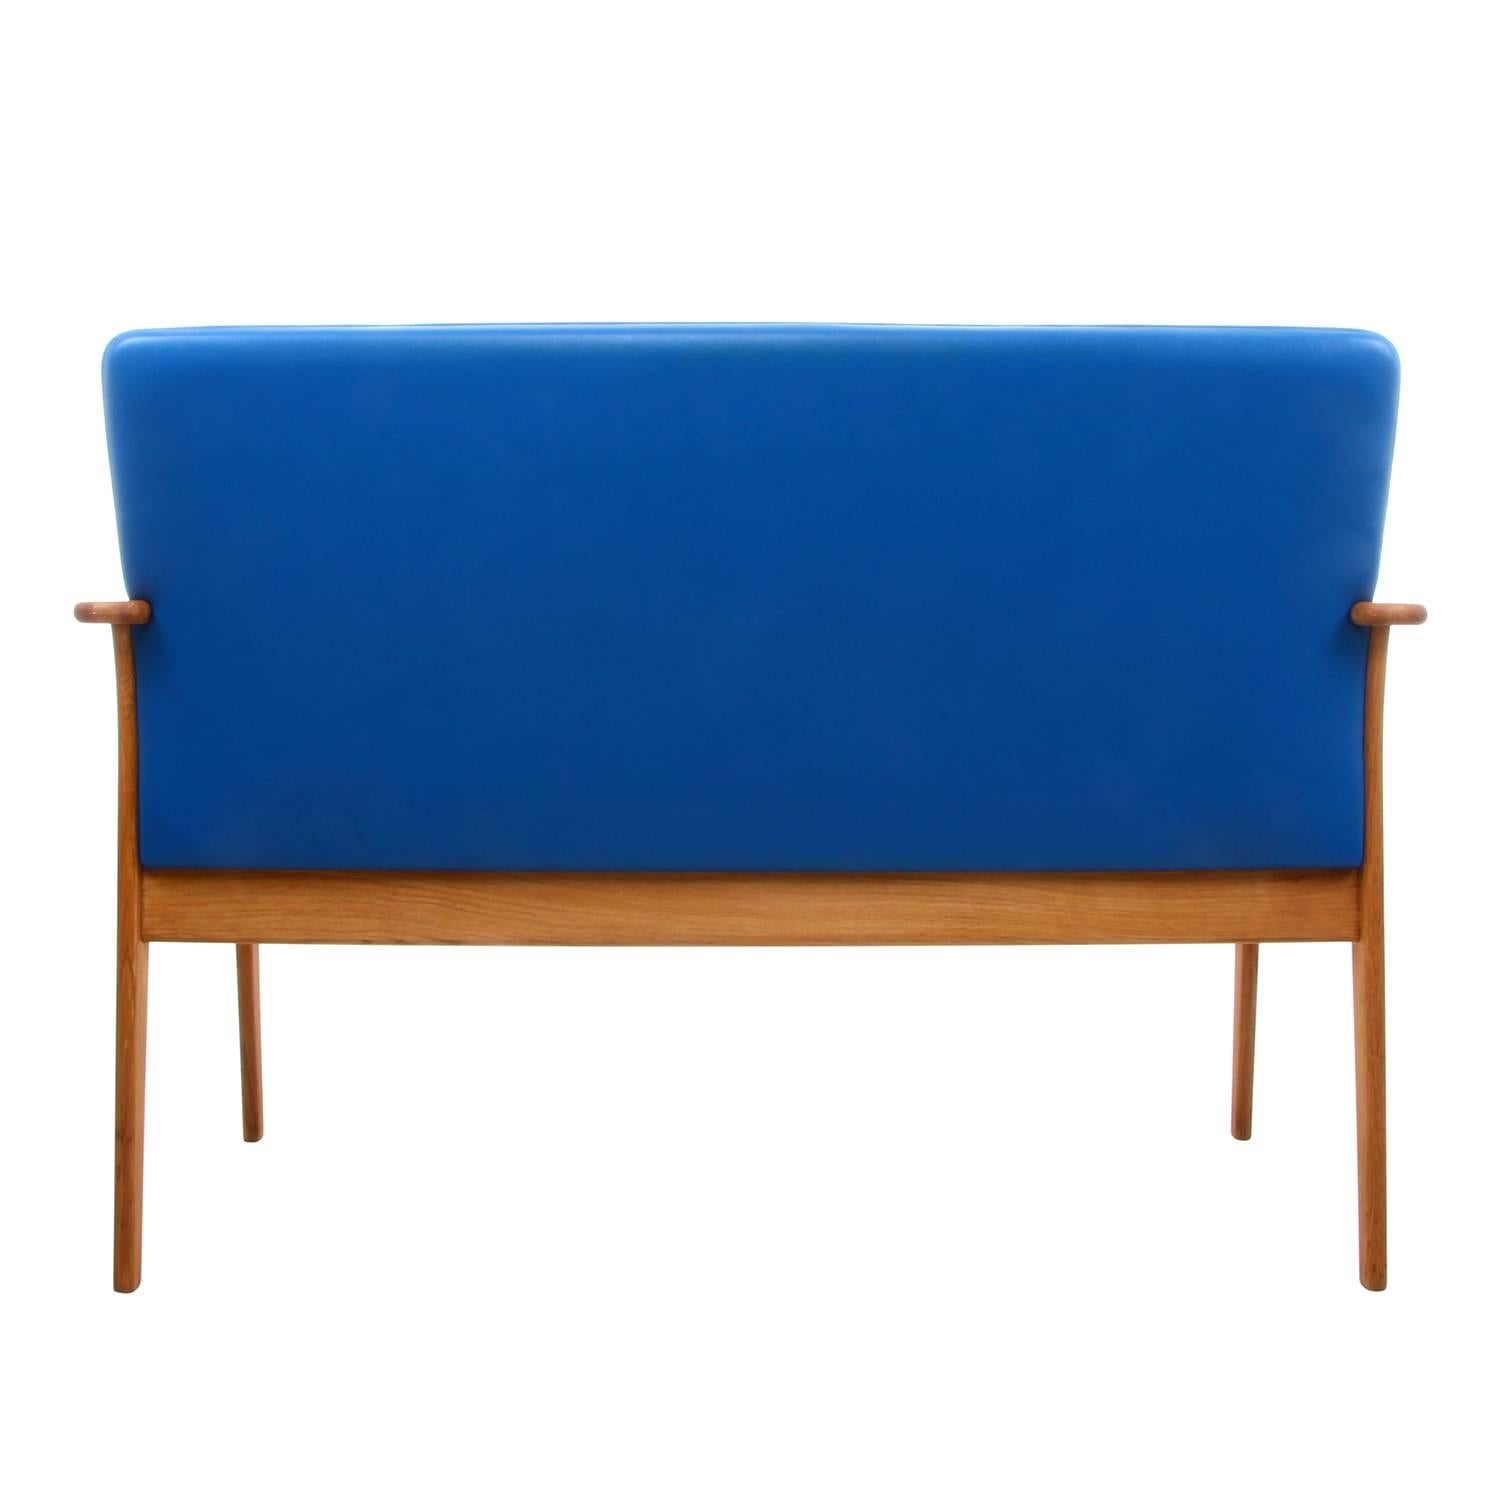 Danish Two-Seat Sofa by Erik Buch, 1970s, Oil-Treated Oak Couch with Blue Upholstery For Sale